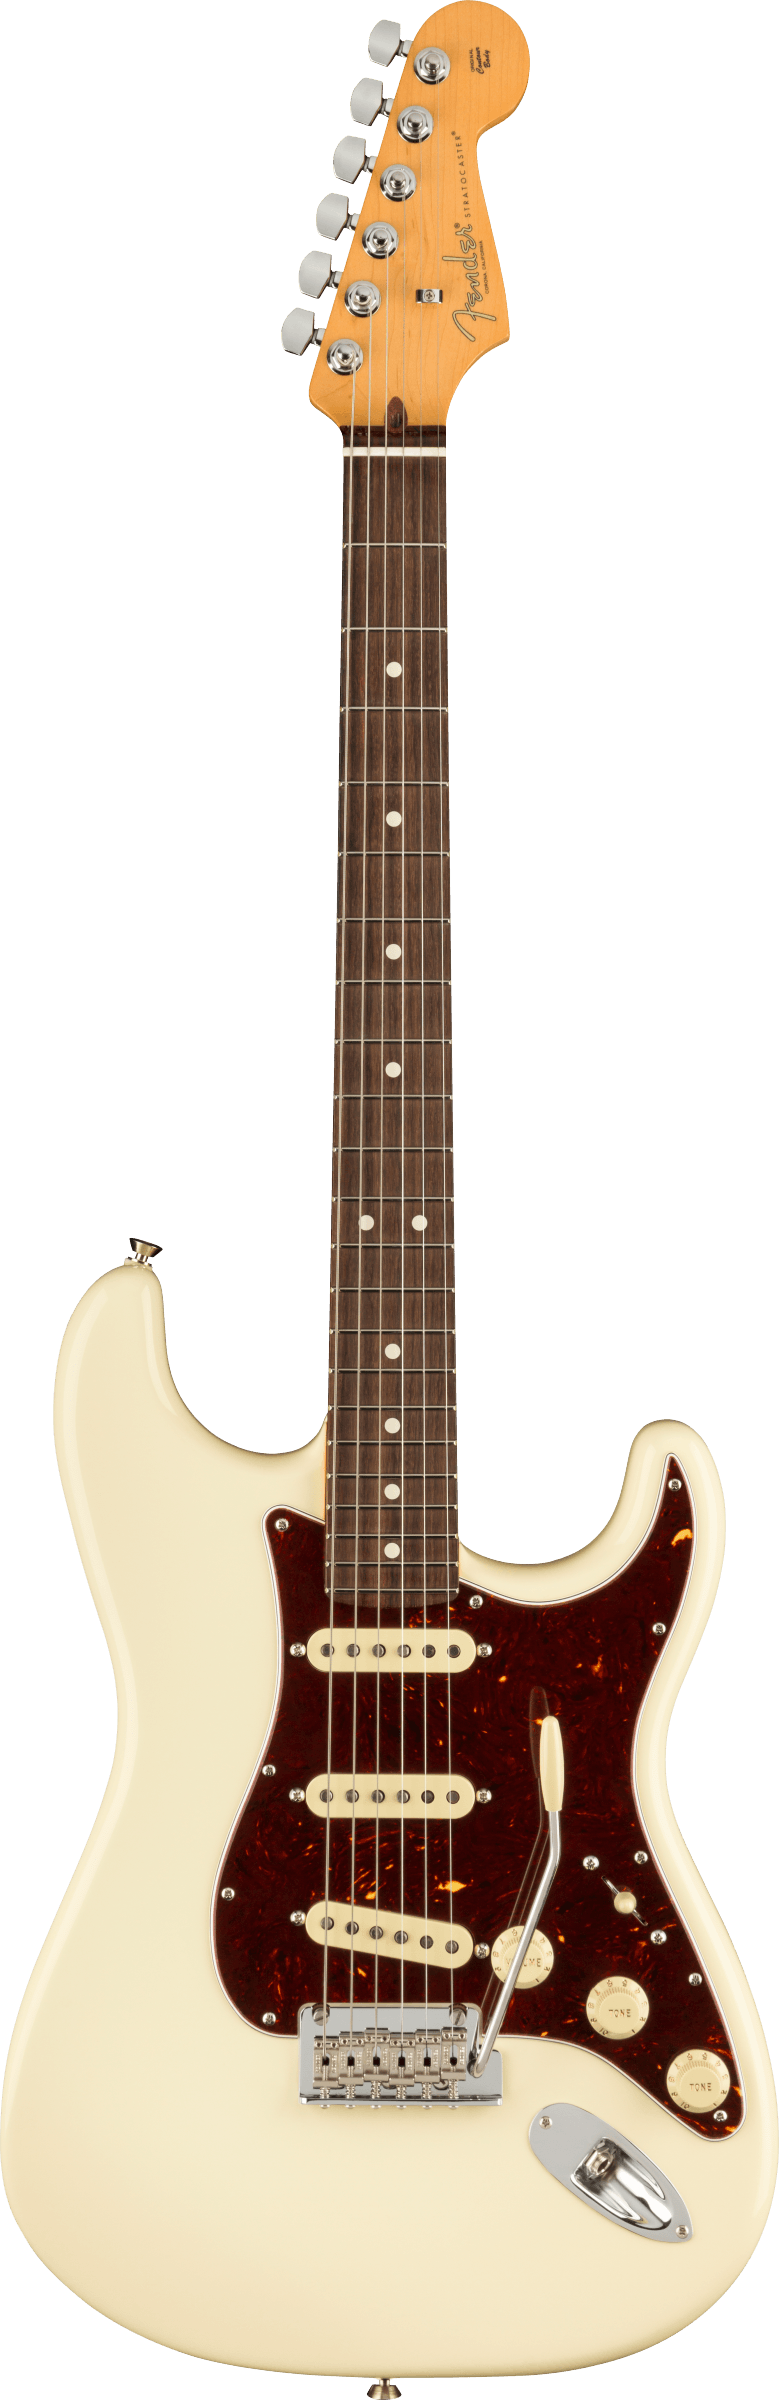 American Professional II Stratocaster Rosewood Fingerboard, Olympic White